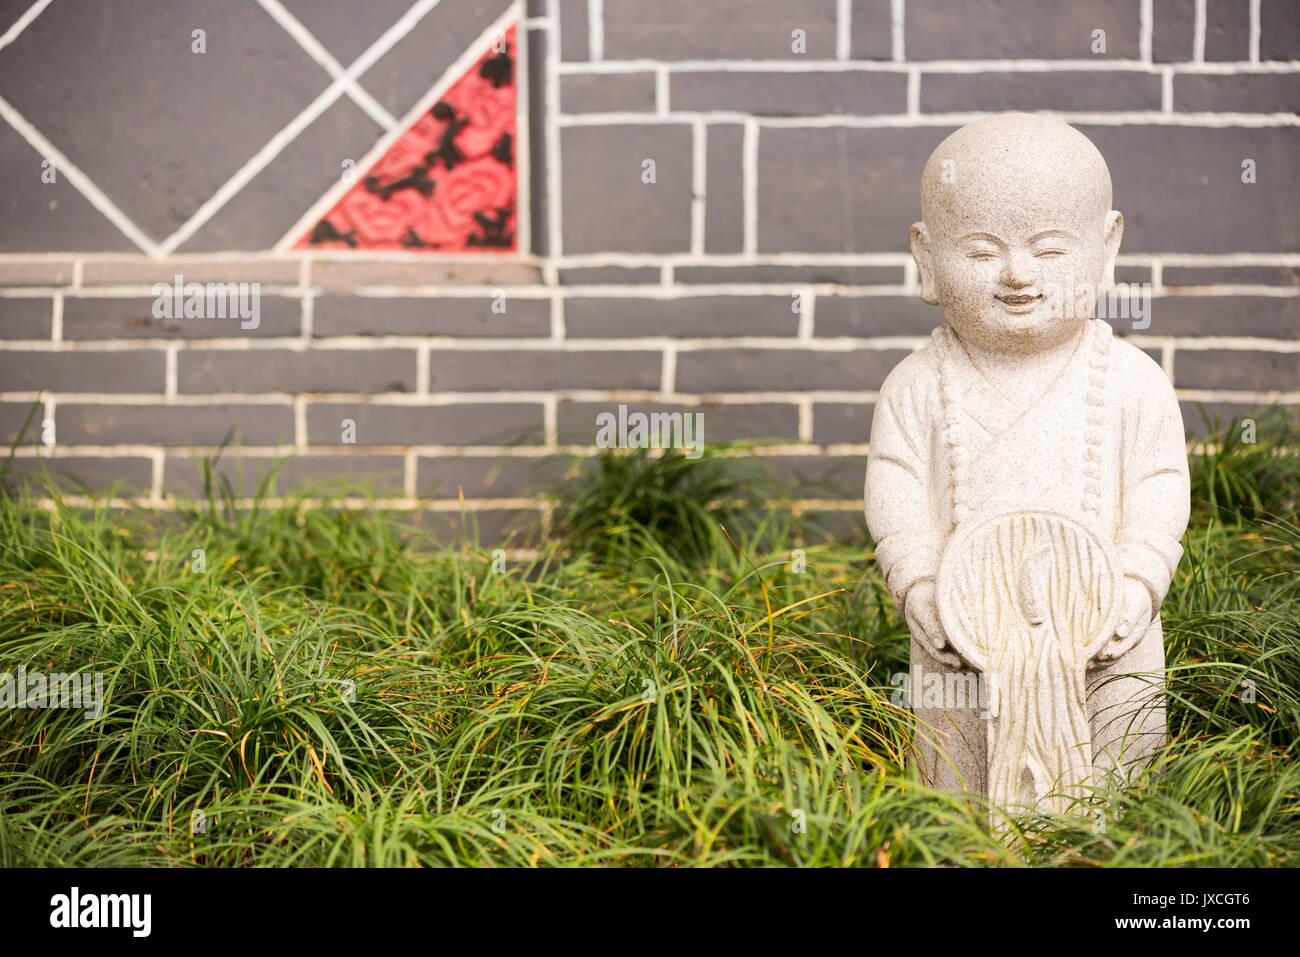 Little buddha stone statue on grass with a brick wall in the bac Stock Photo